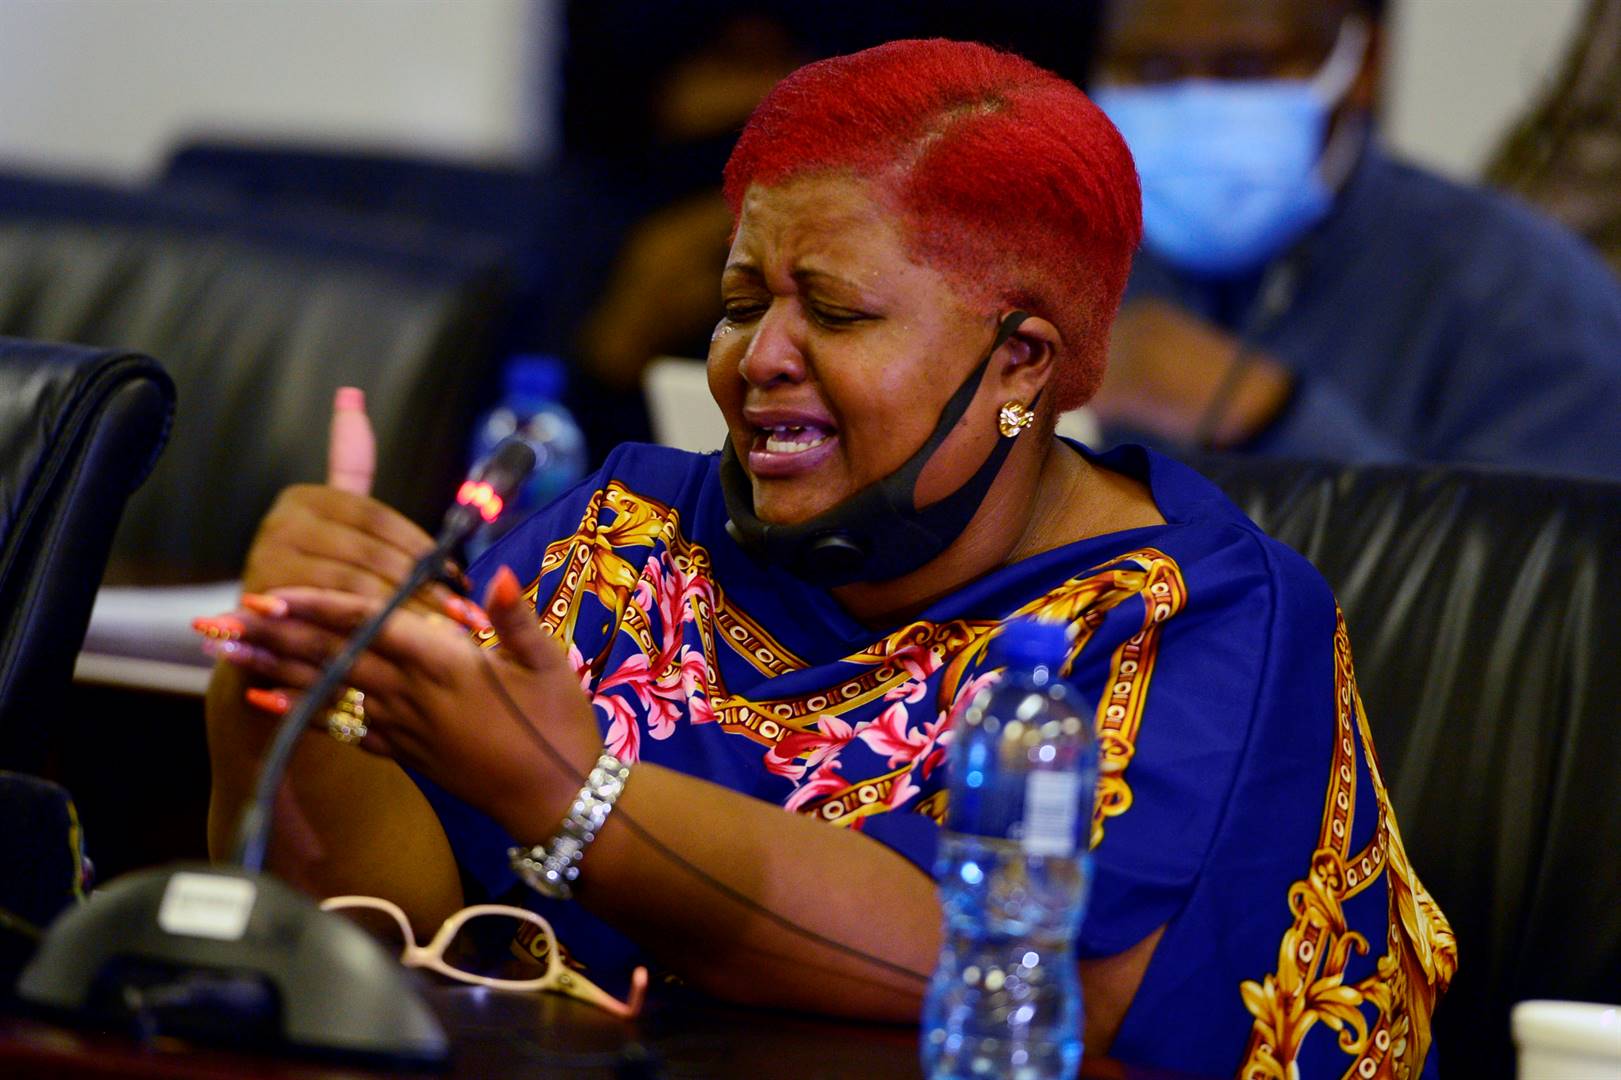 Meisie Reaname gave her testimony at the CRL commission about her alleged rape. Photos by Trevor Kunene